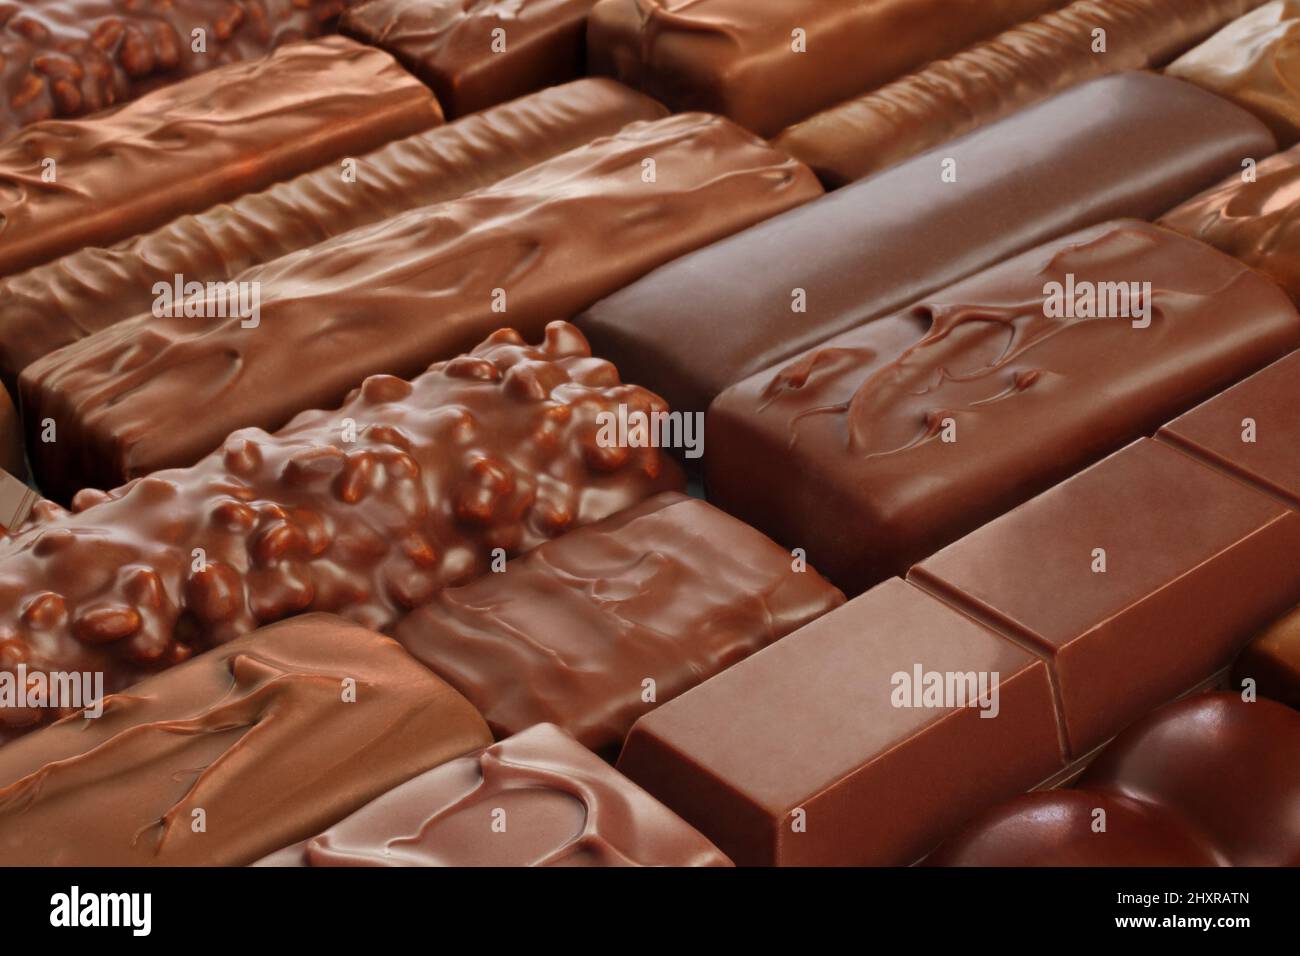 Different kind of Chocolate bars background close-up Stock Photo